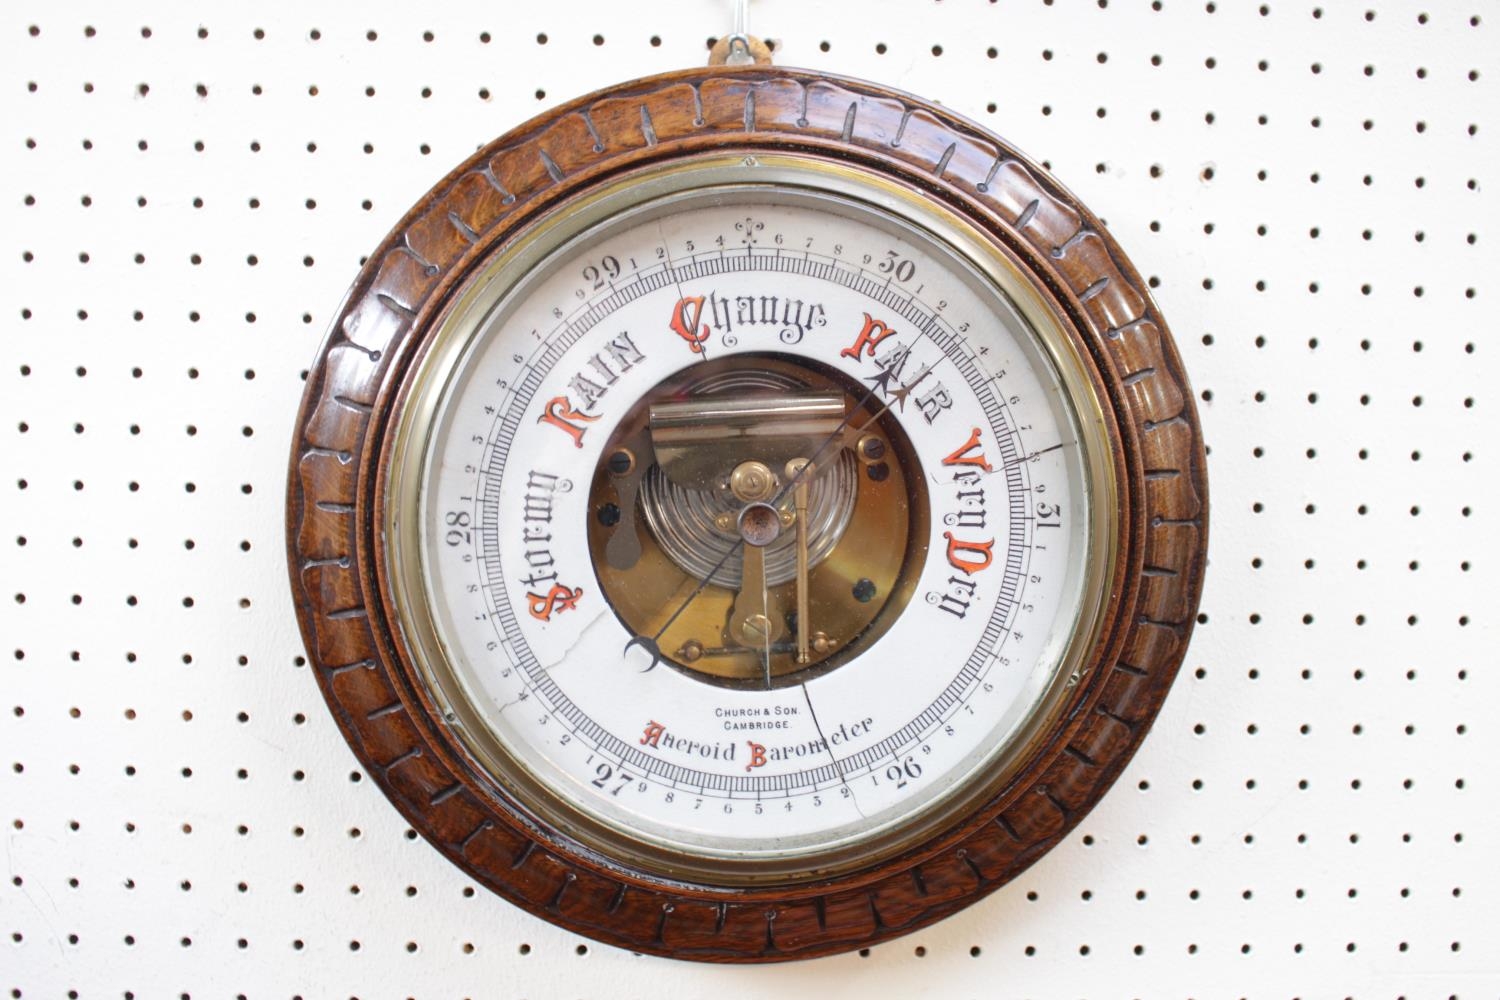 Edwardian Church & Son of Cambridge Aneroid and Barometer in carved circular oak frame. 28cm in